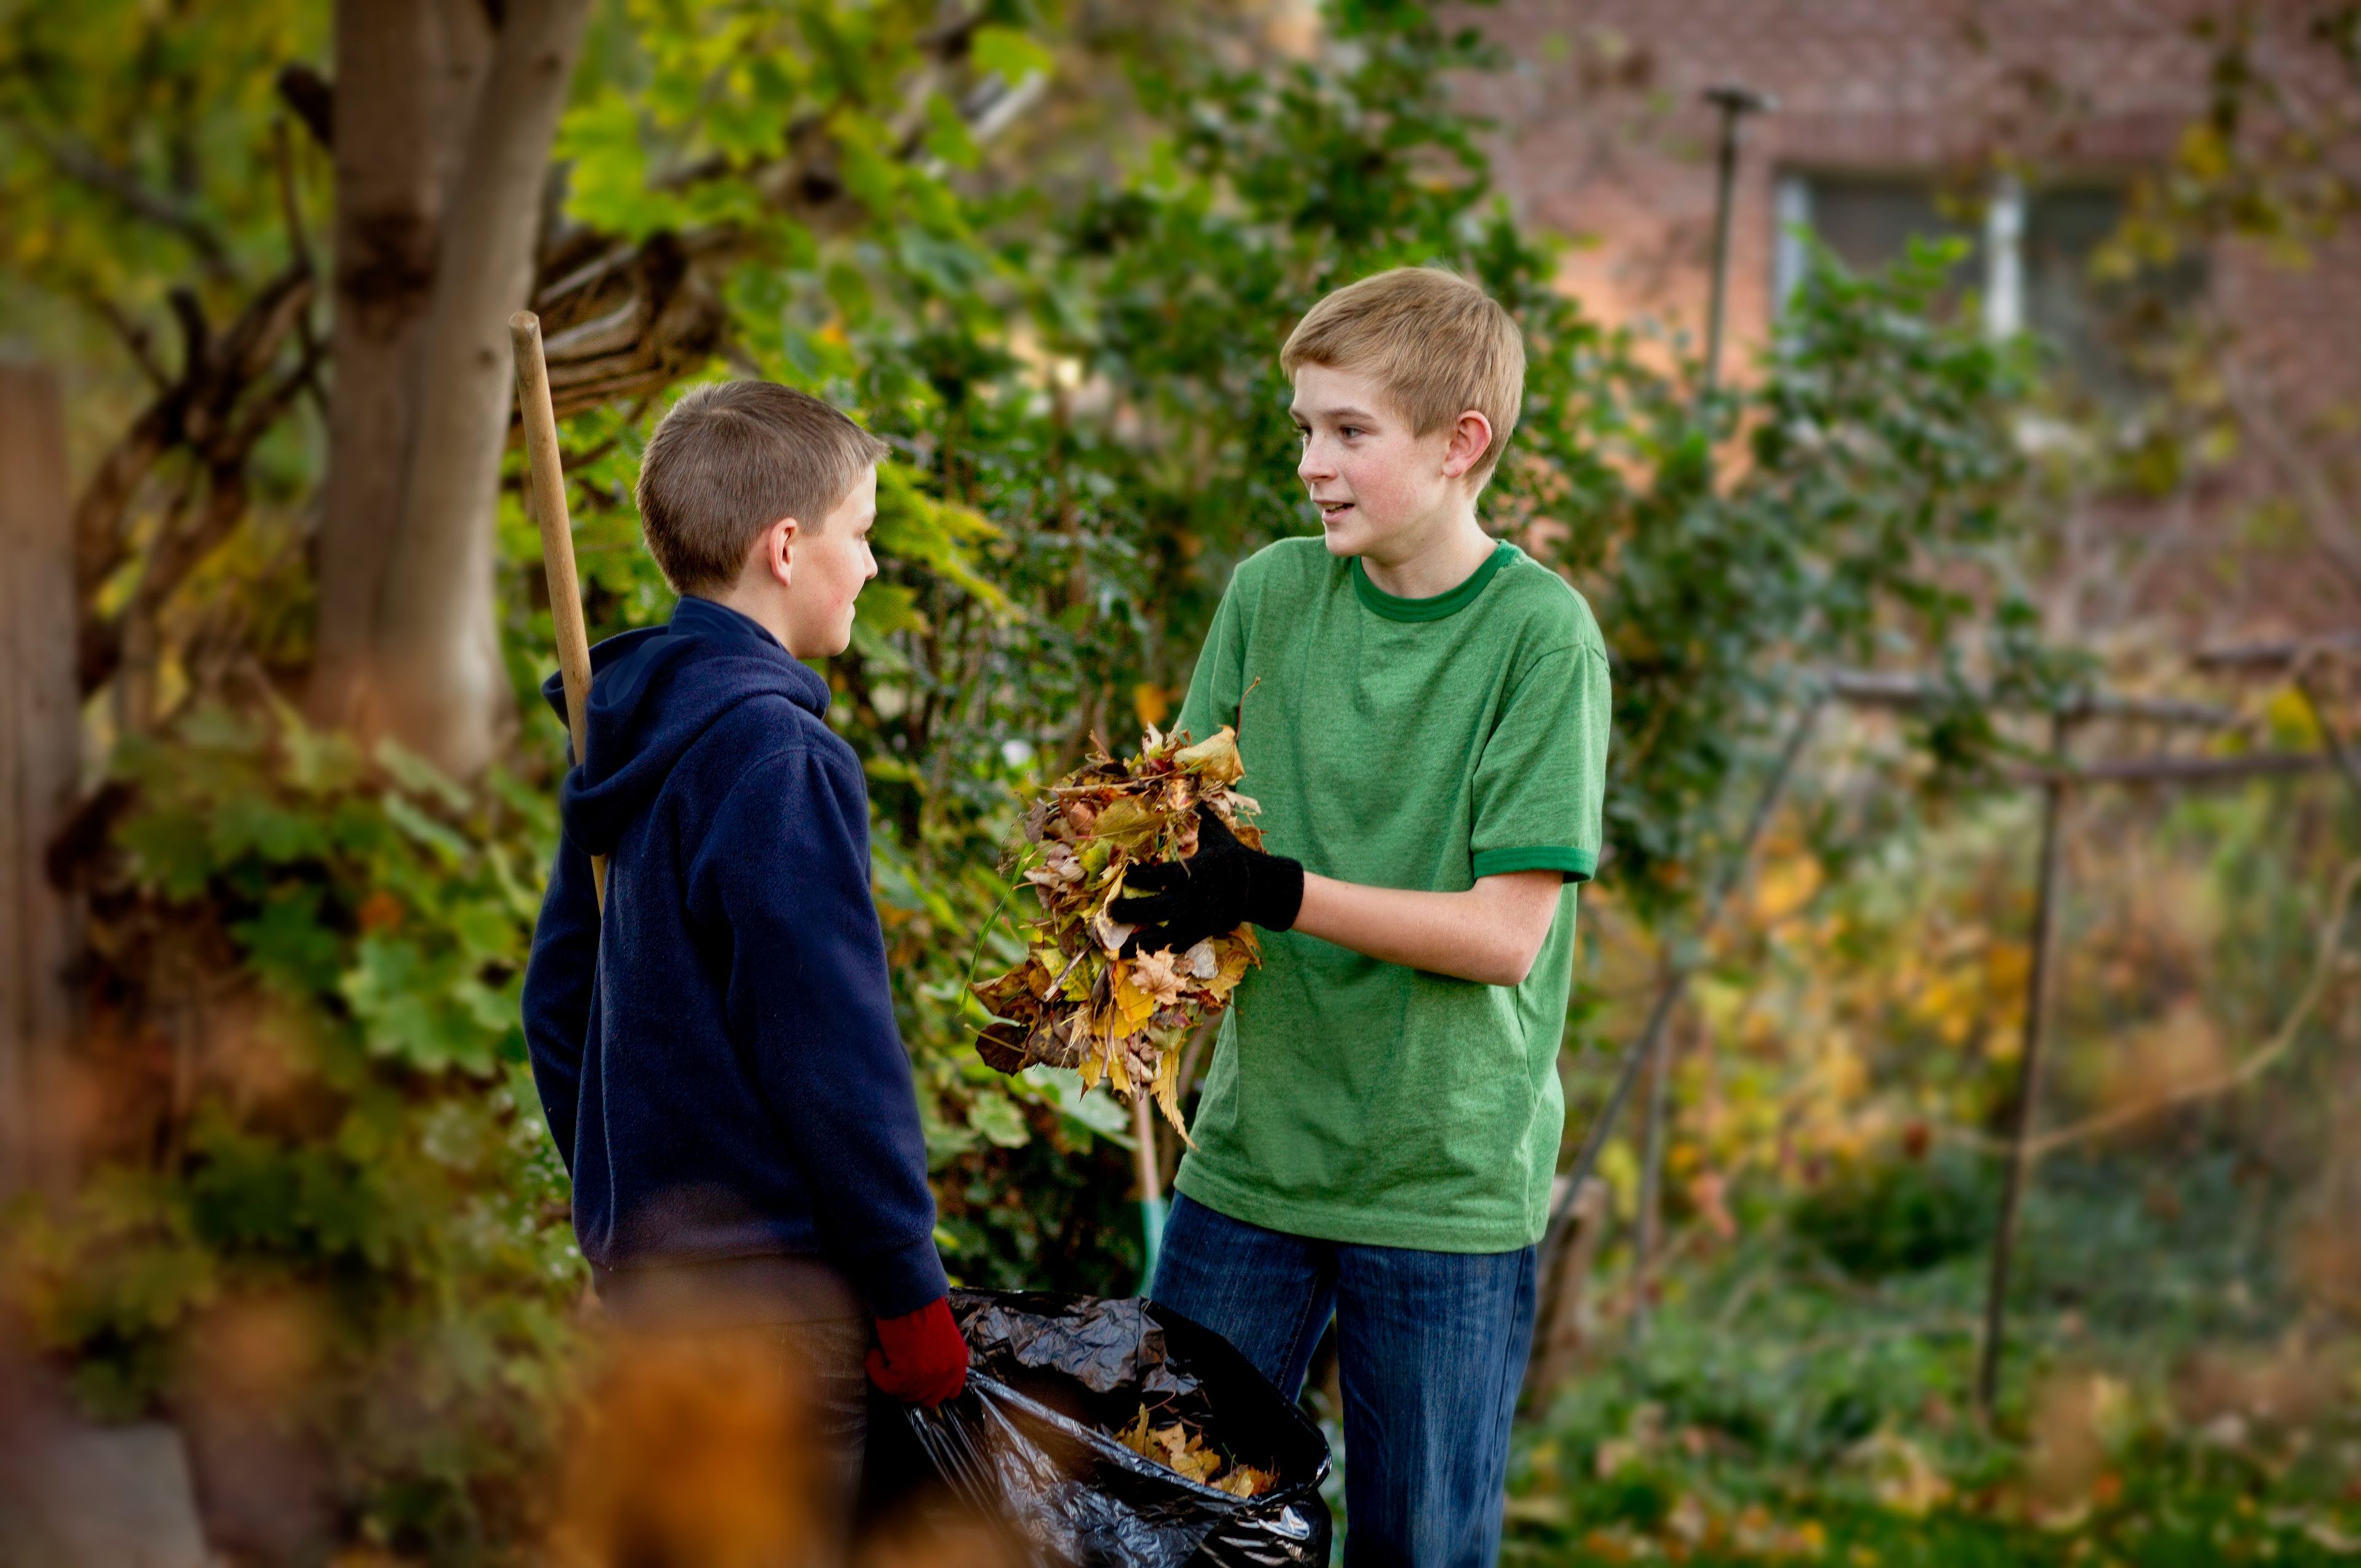 Two young boys rake the leaves in a yard.  